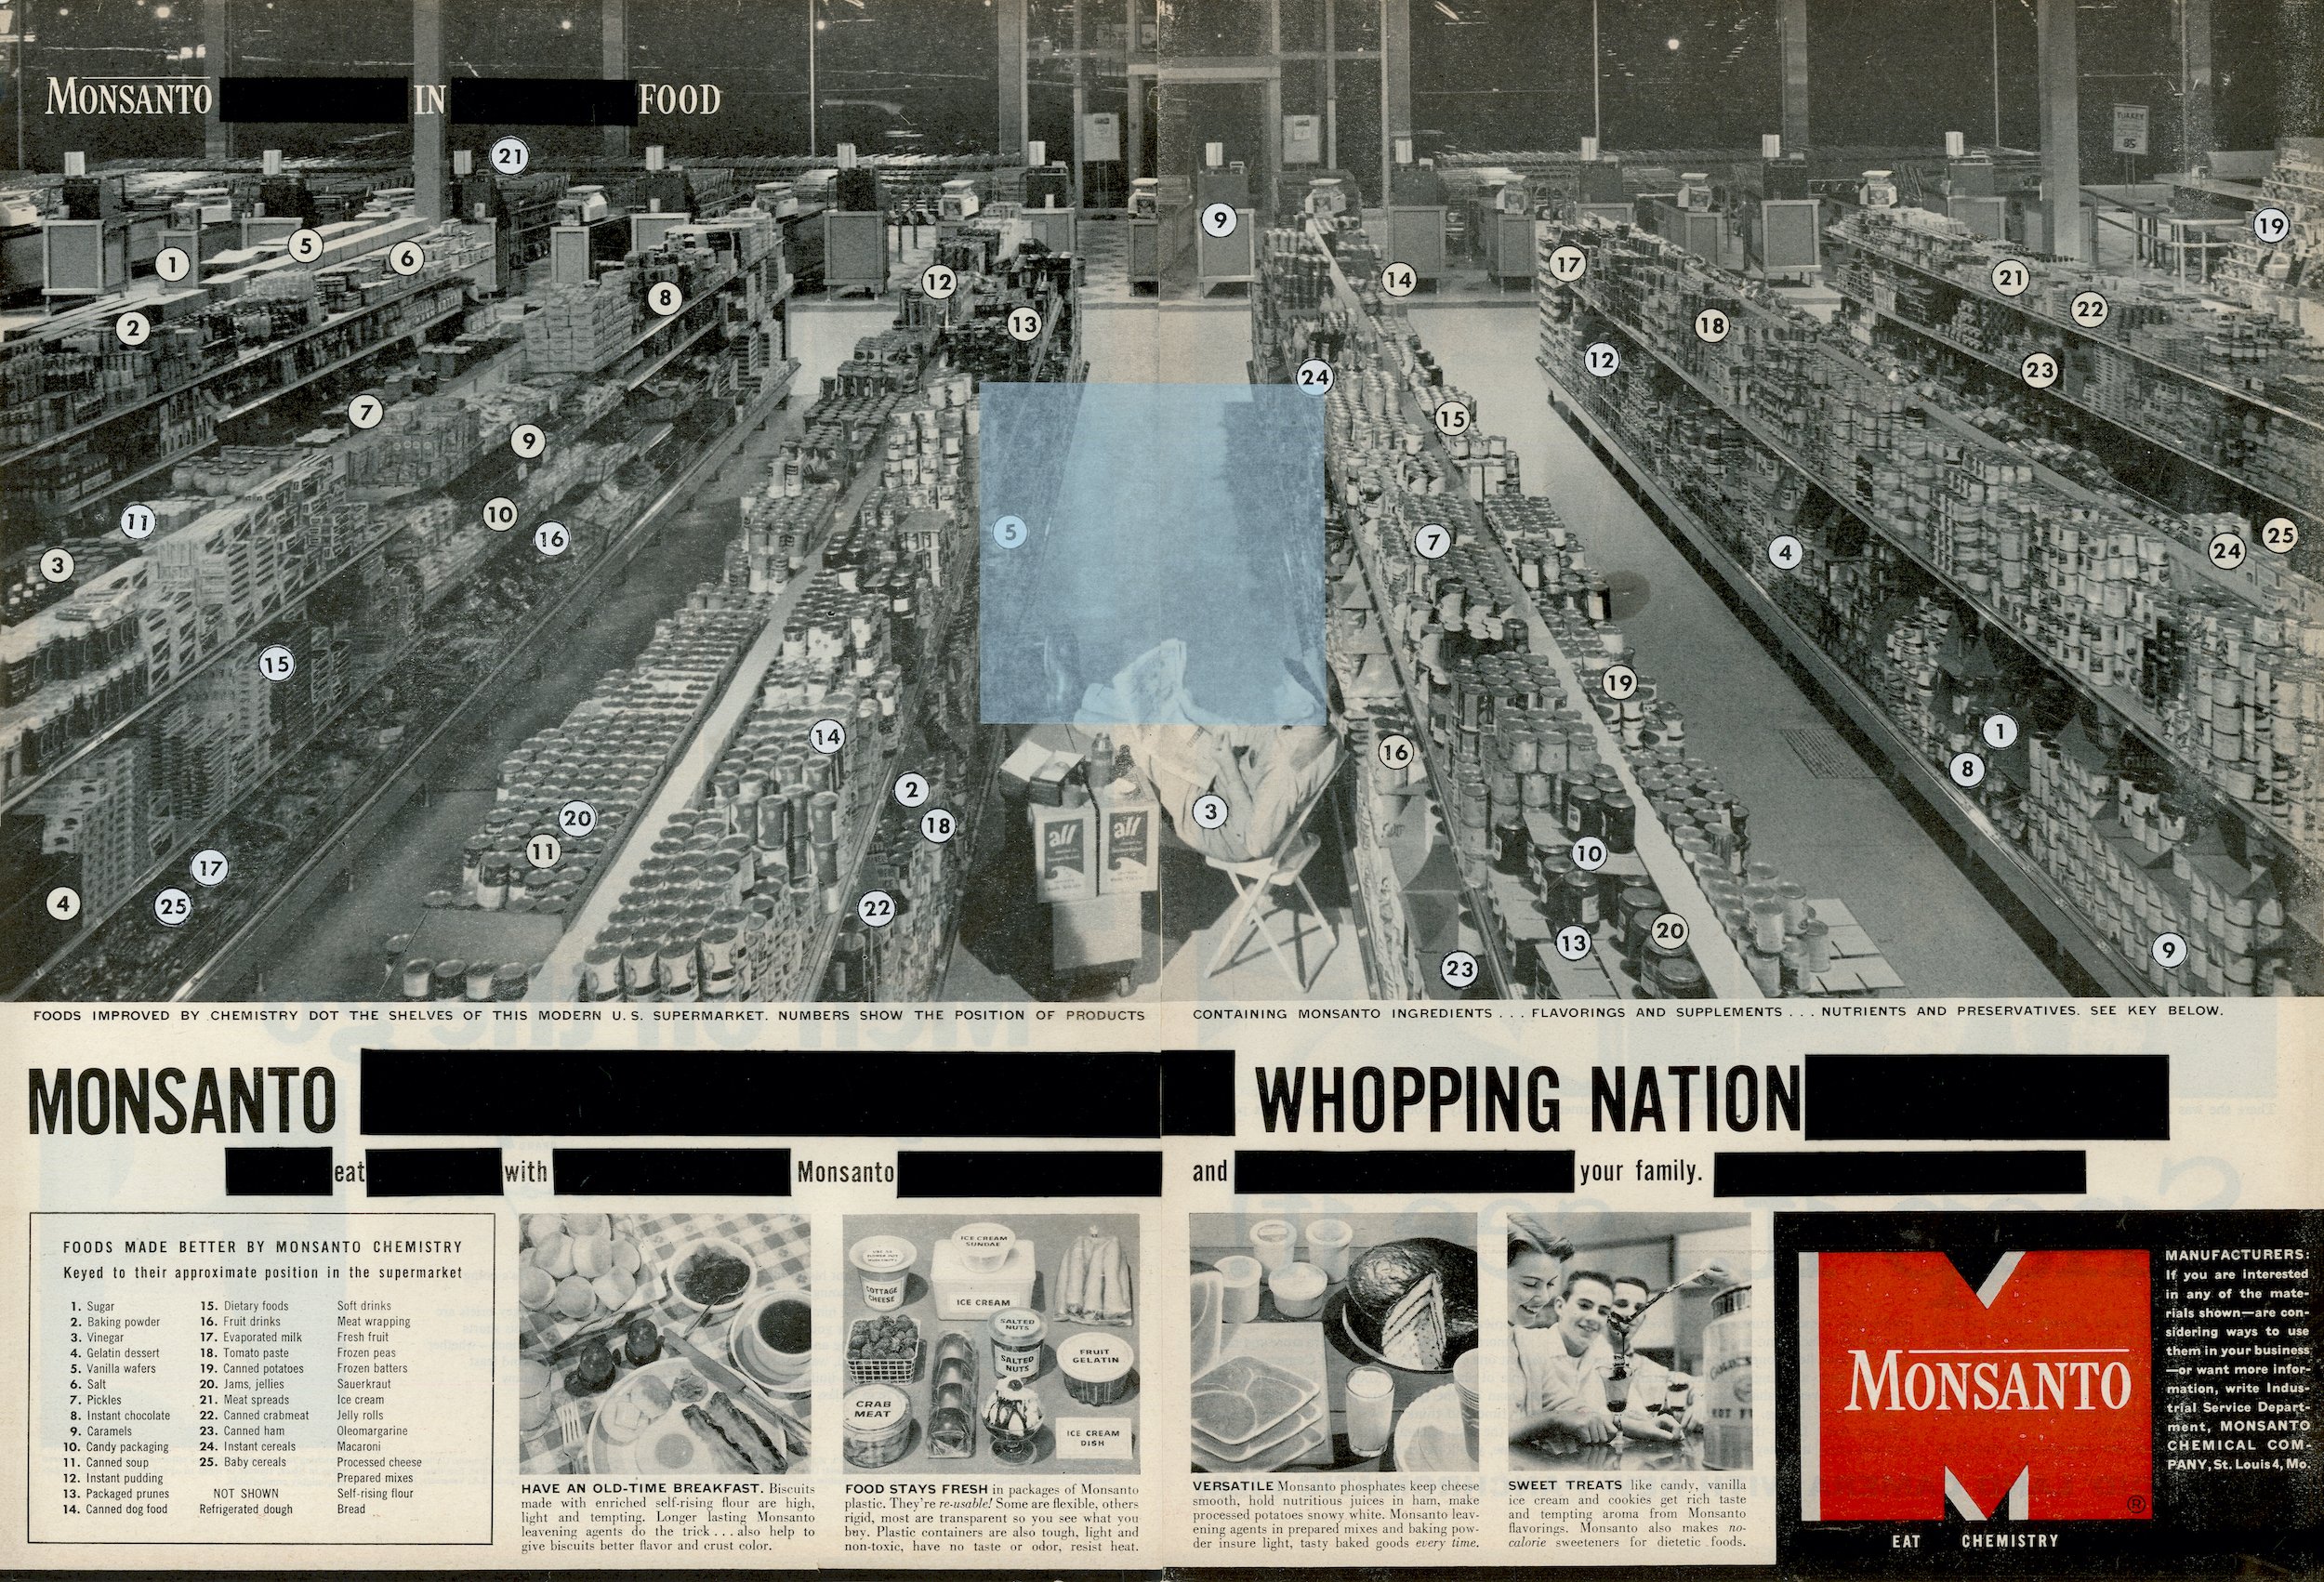   Monsanto Whopping Nation,  collage on 1956 Monsanto advertisement, 13.75”x 20”, 2022 